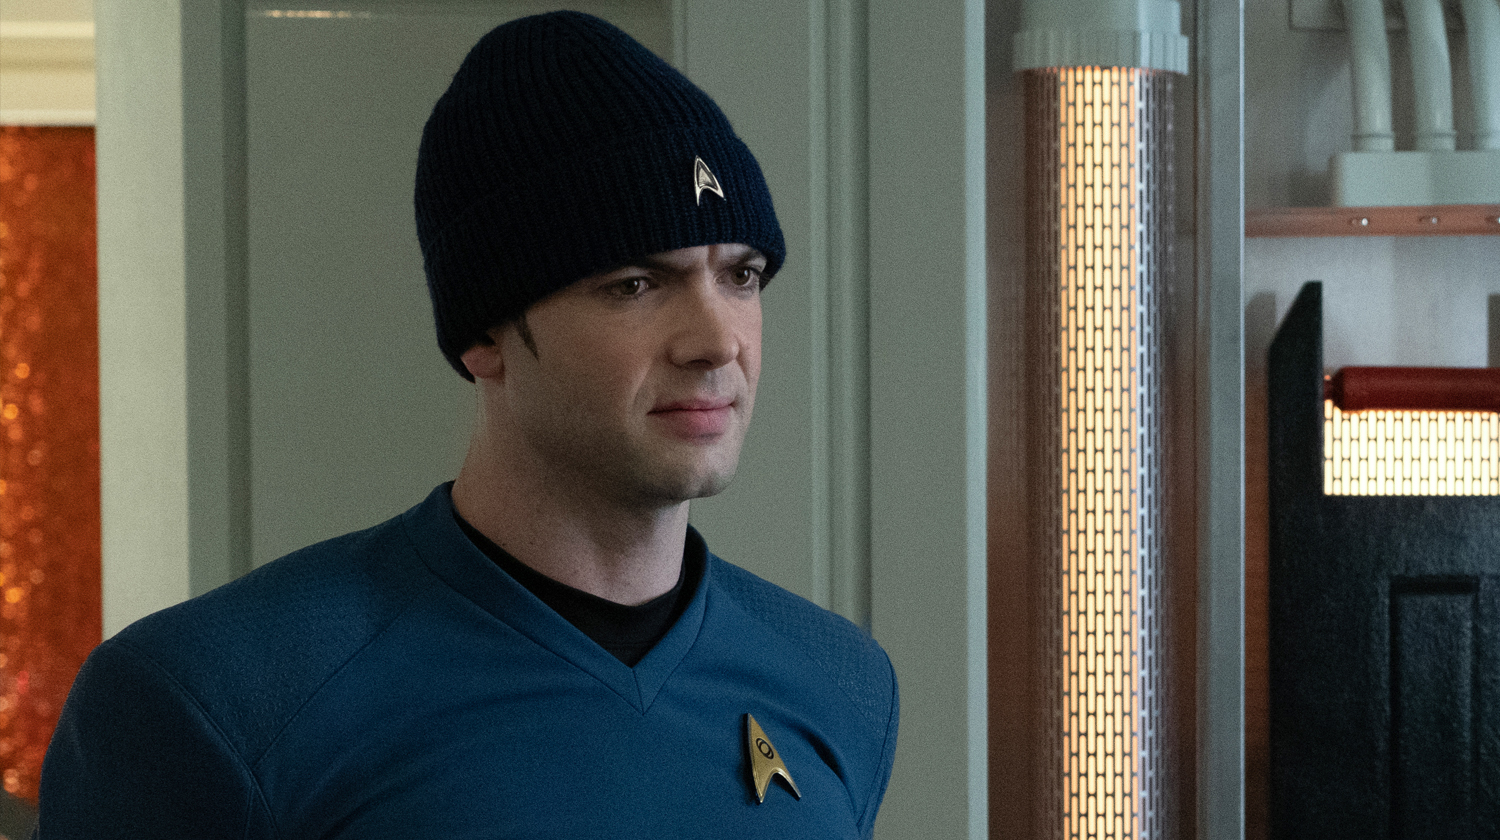 Spock sports a stylish Starfleet-branded beanie in this week's episode, 'cause it's very cold in space.